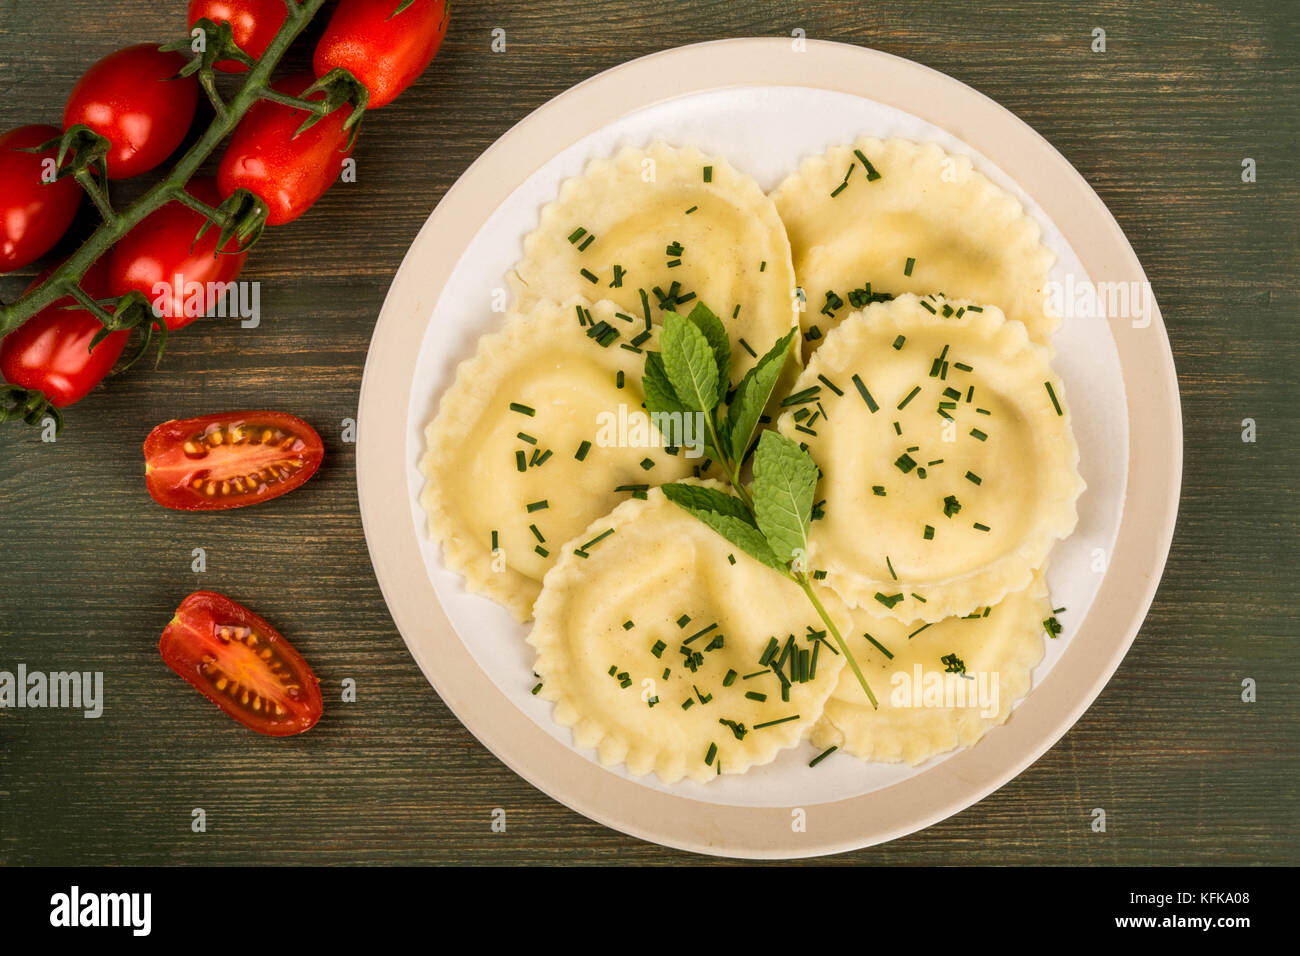 Italian Style Cappelletti With Parma Ham Ravioli Pasta On A Green Wooden Background Stock Photo